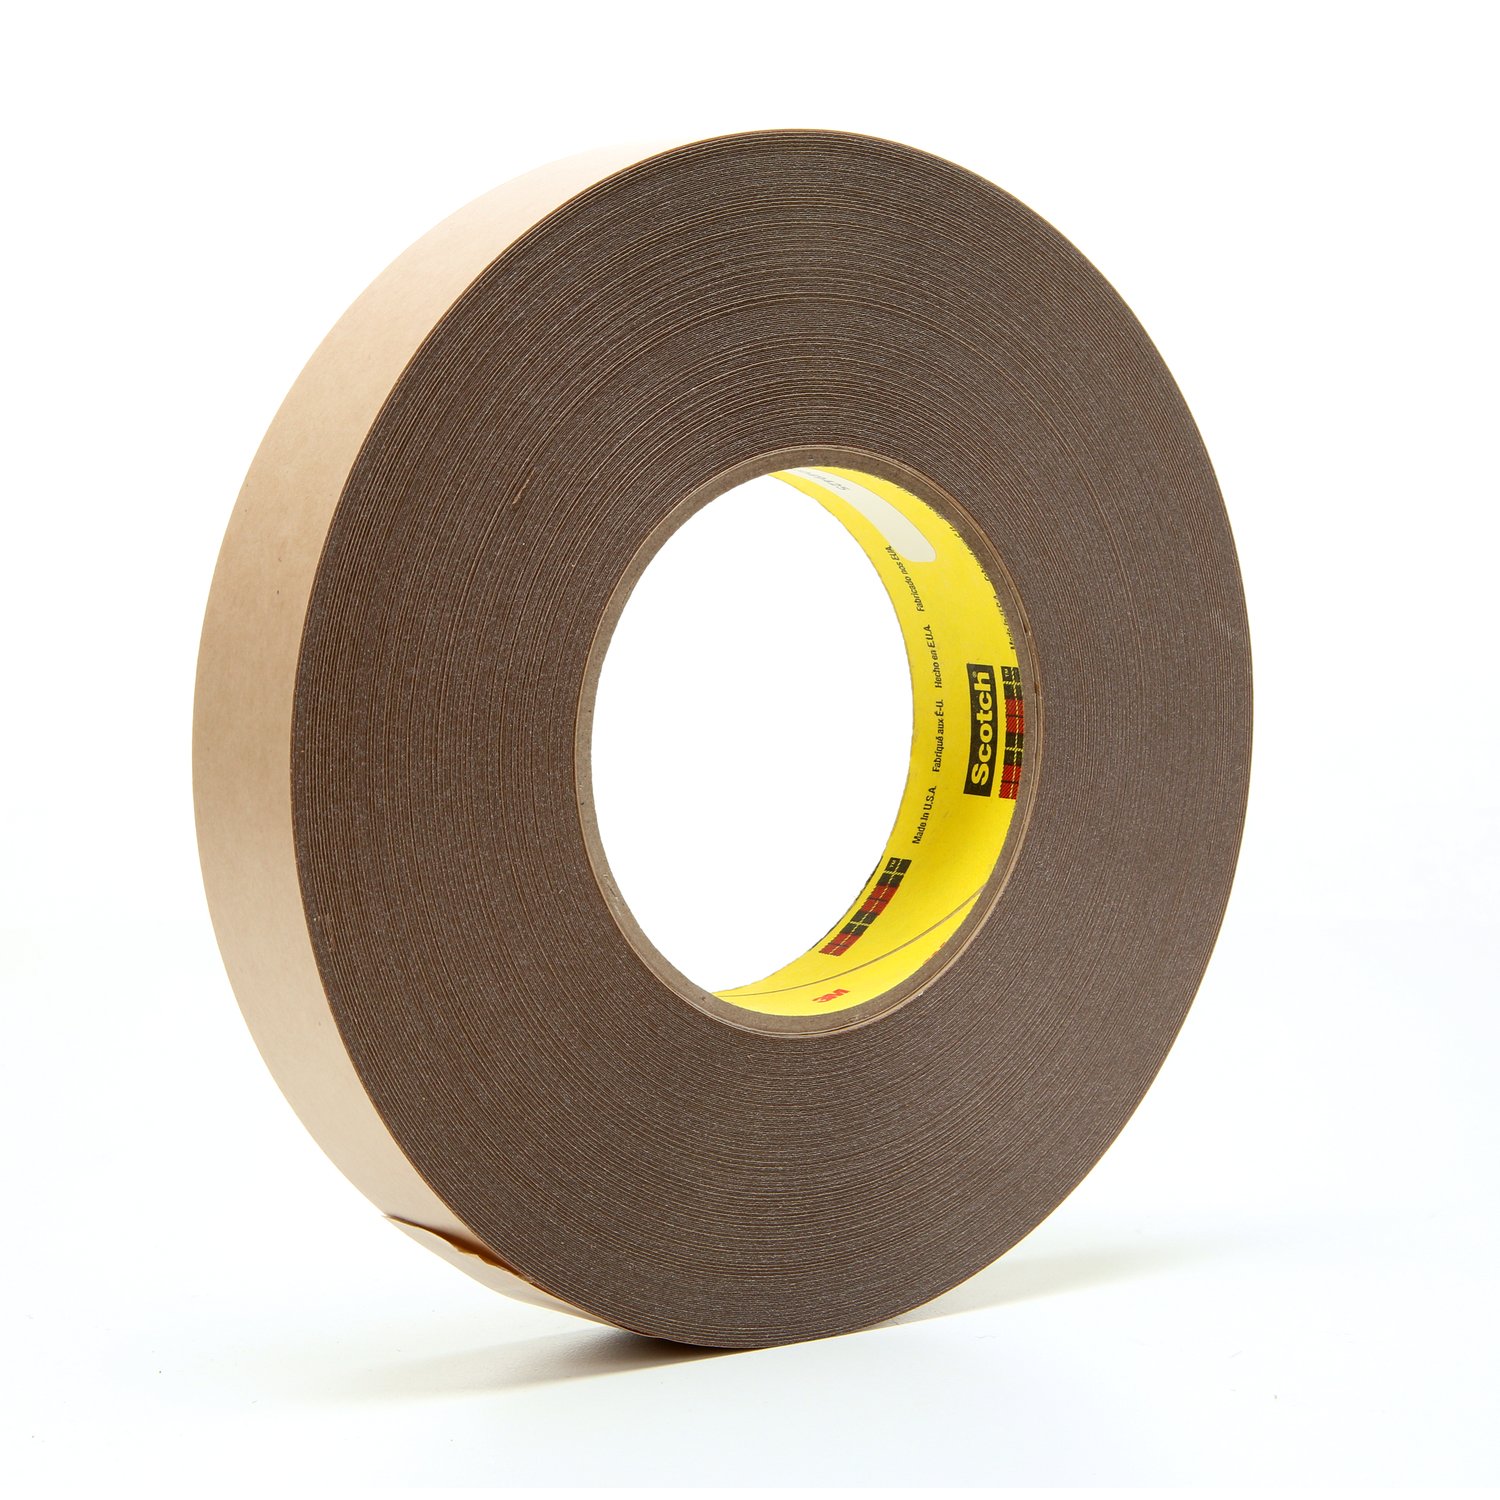 7000050147 - 3M Polyester Tape 8403, Green, 12 in x 72 yd, 2.4 mil, 4 rolls per case